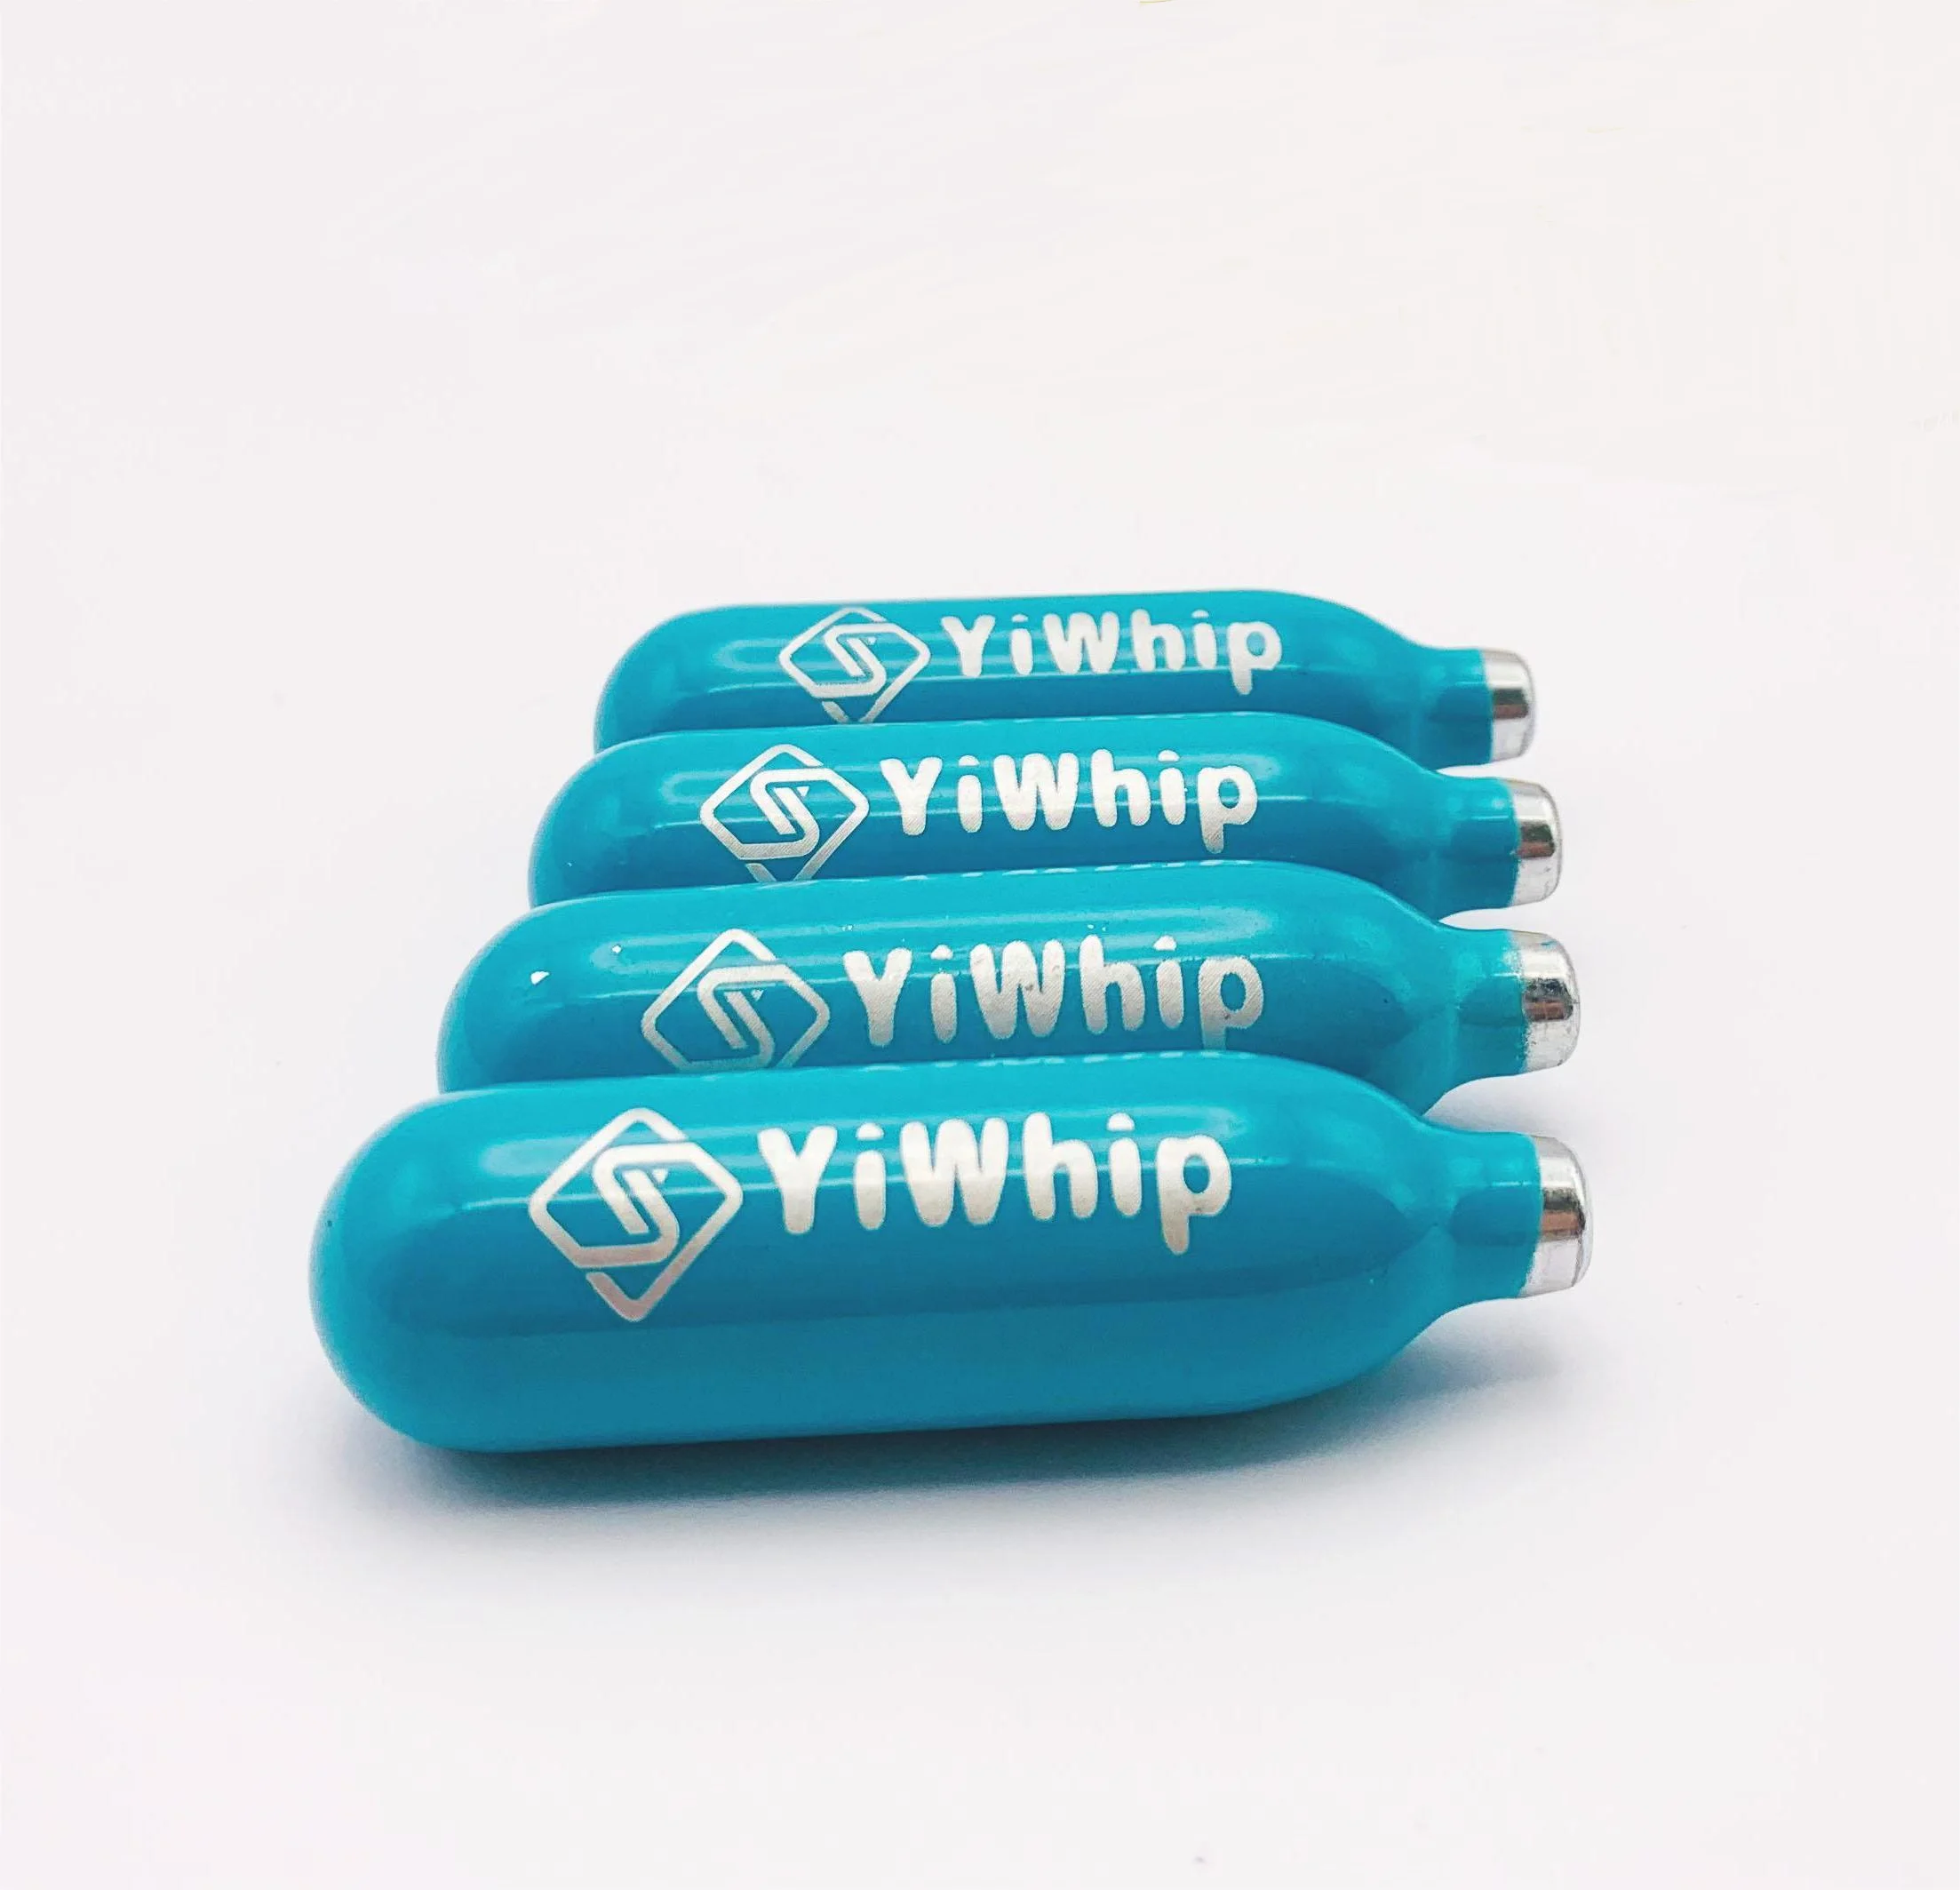 Yiwhip Wholesale Ultra Pure High Quality Whipped 8g 9g Cream Chargers EU Canisters Fast Delivery